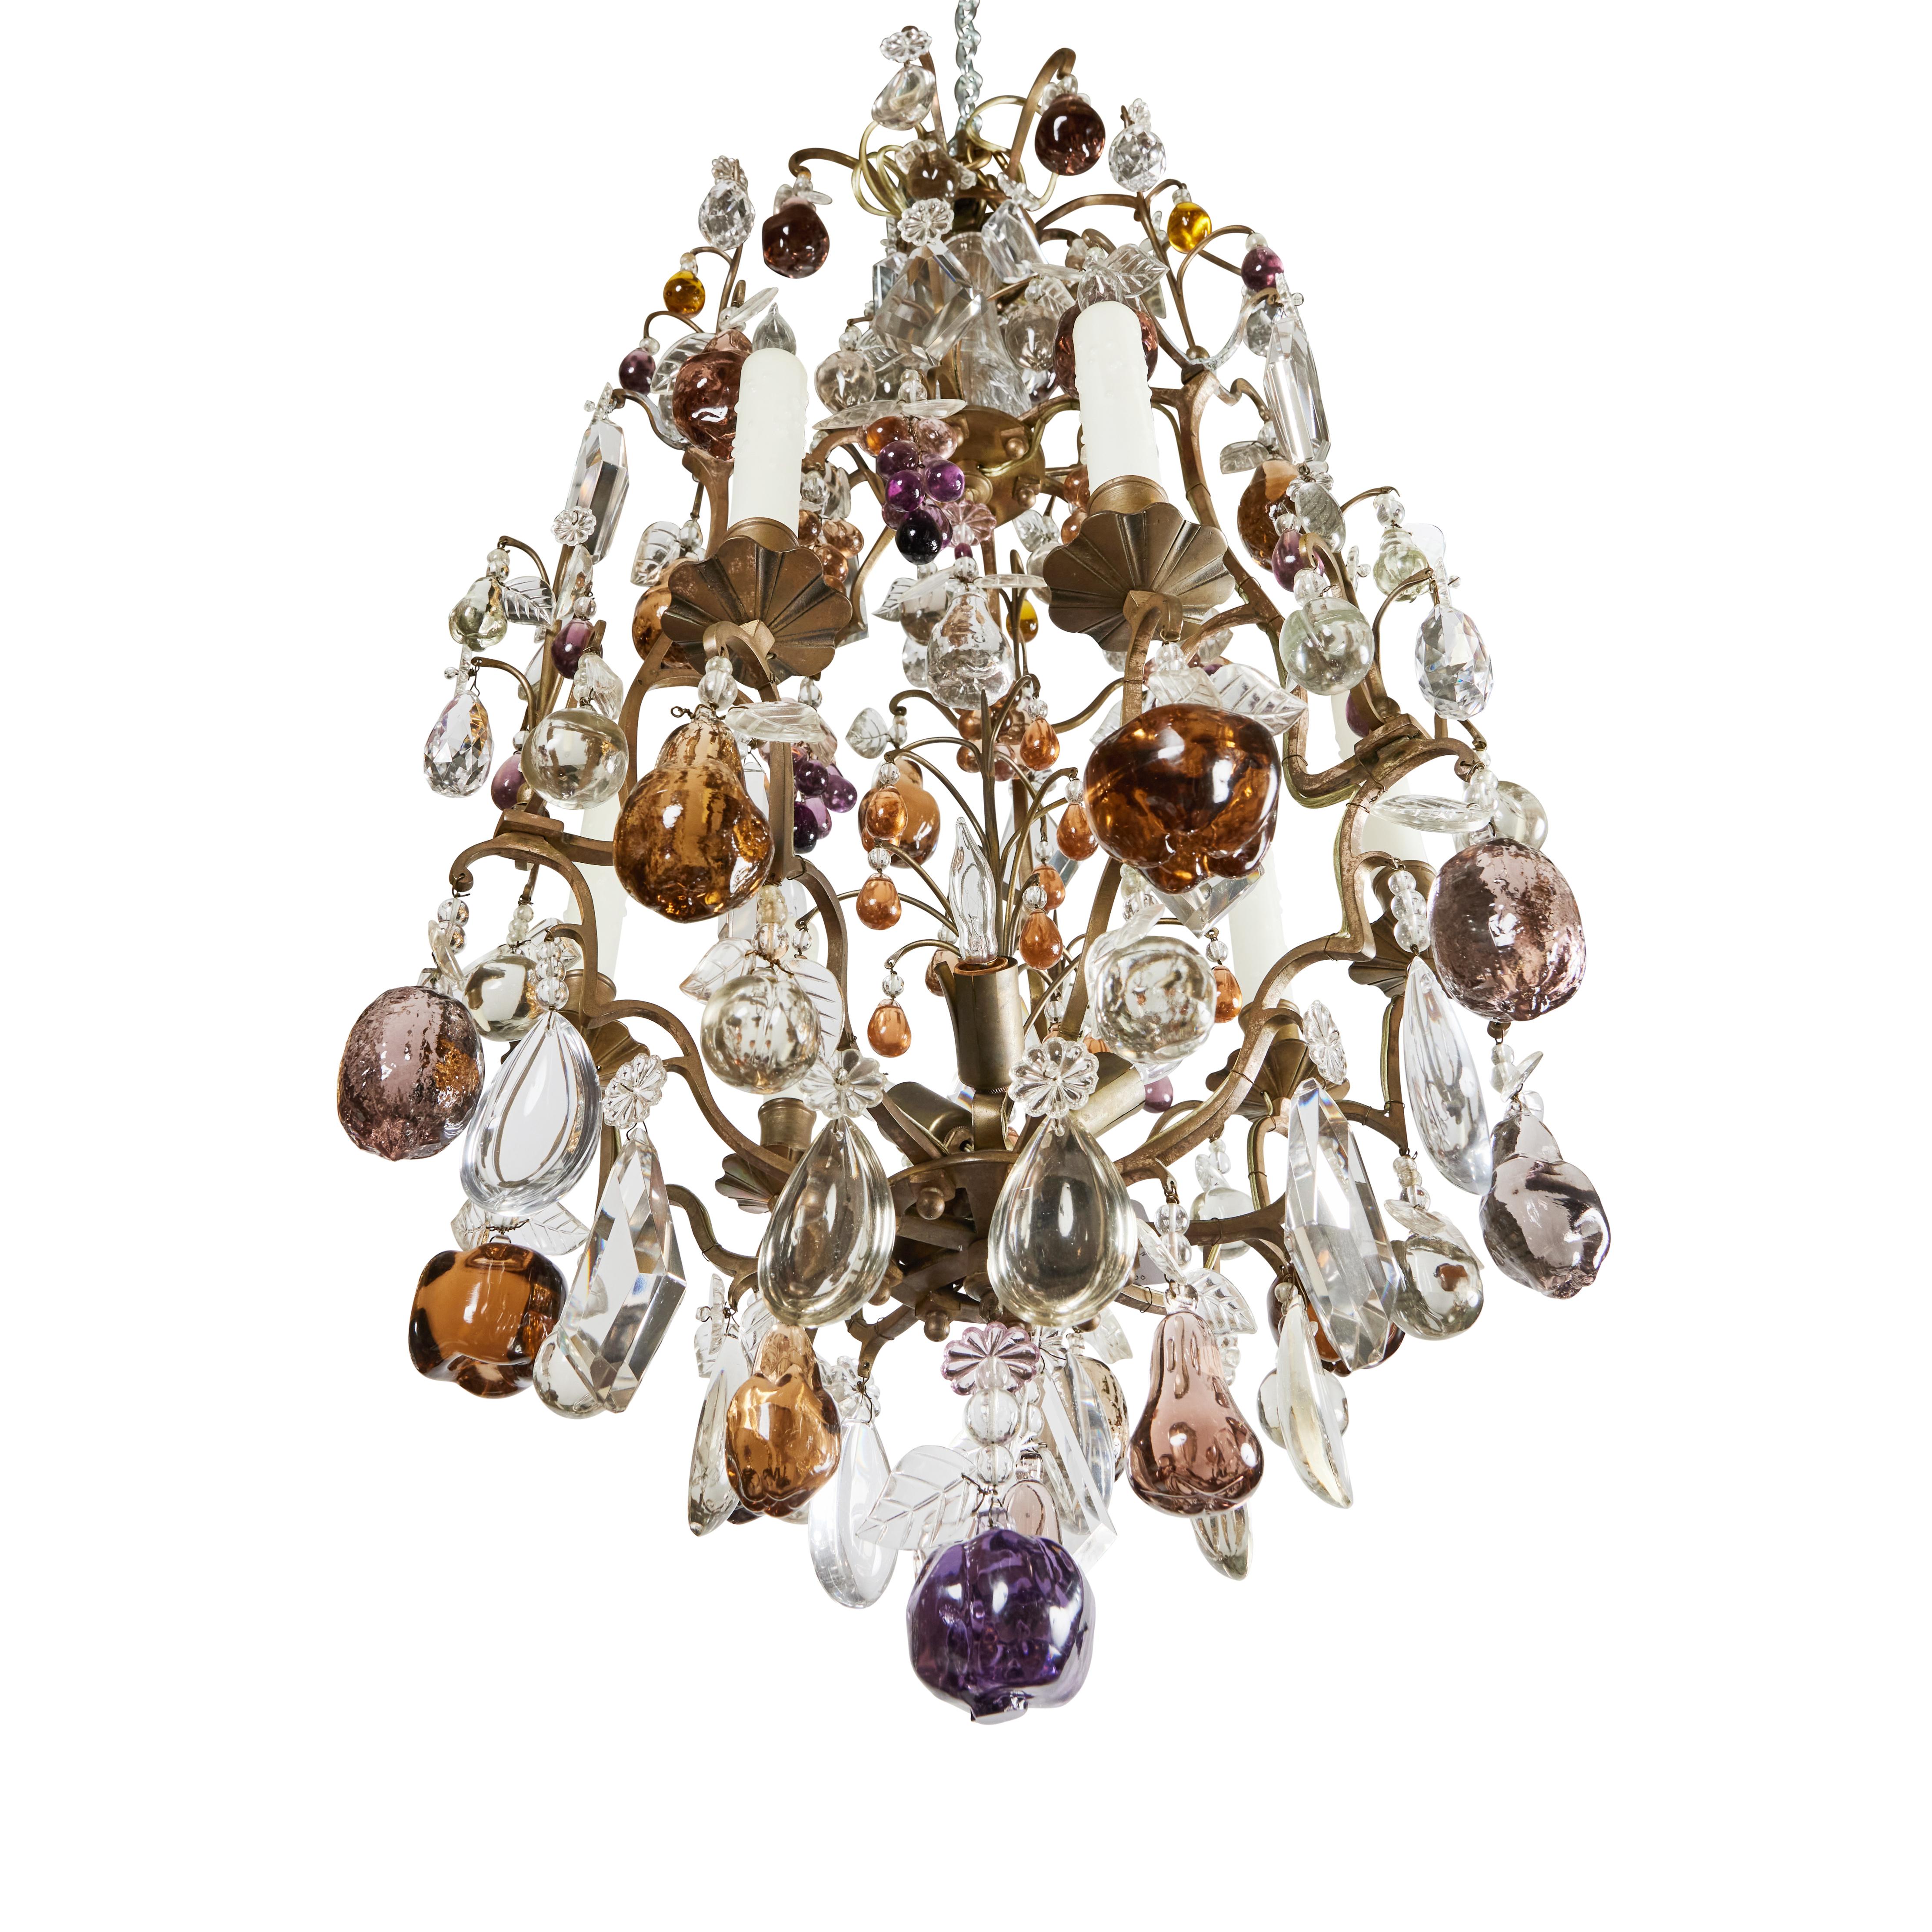 A charming, Louis XVI style gilded bronze and crystal chandelier featuring colored glass pears, apples and grapes.  9 lights.  